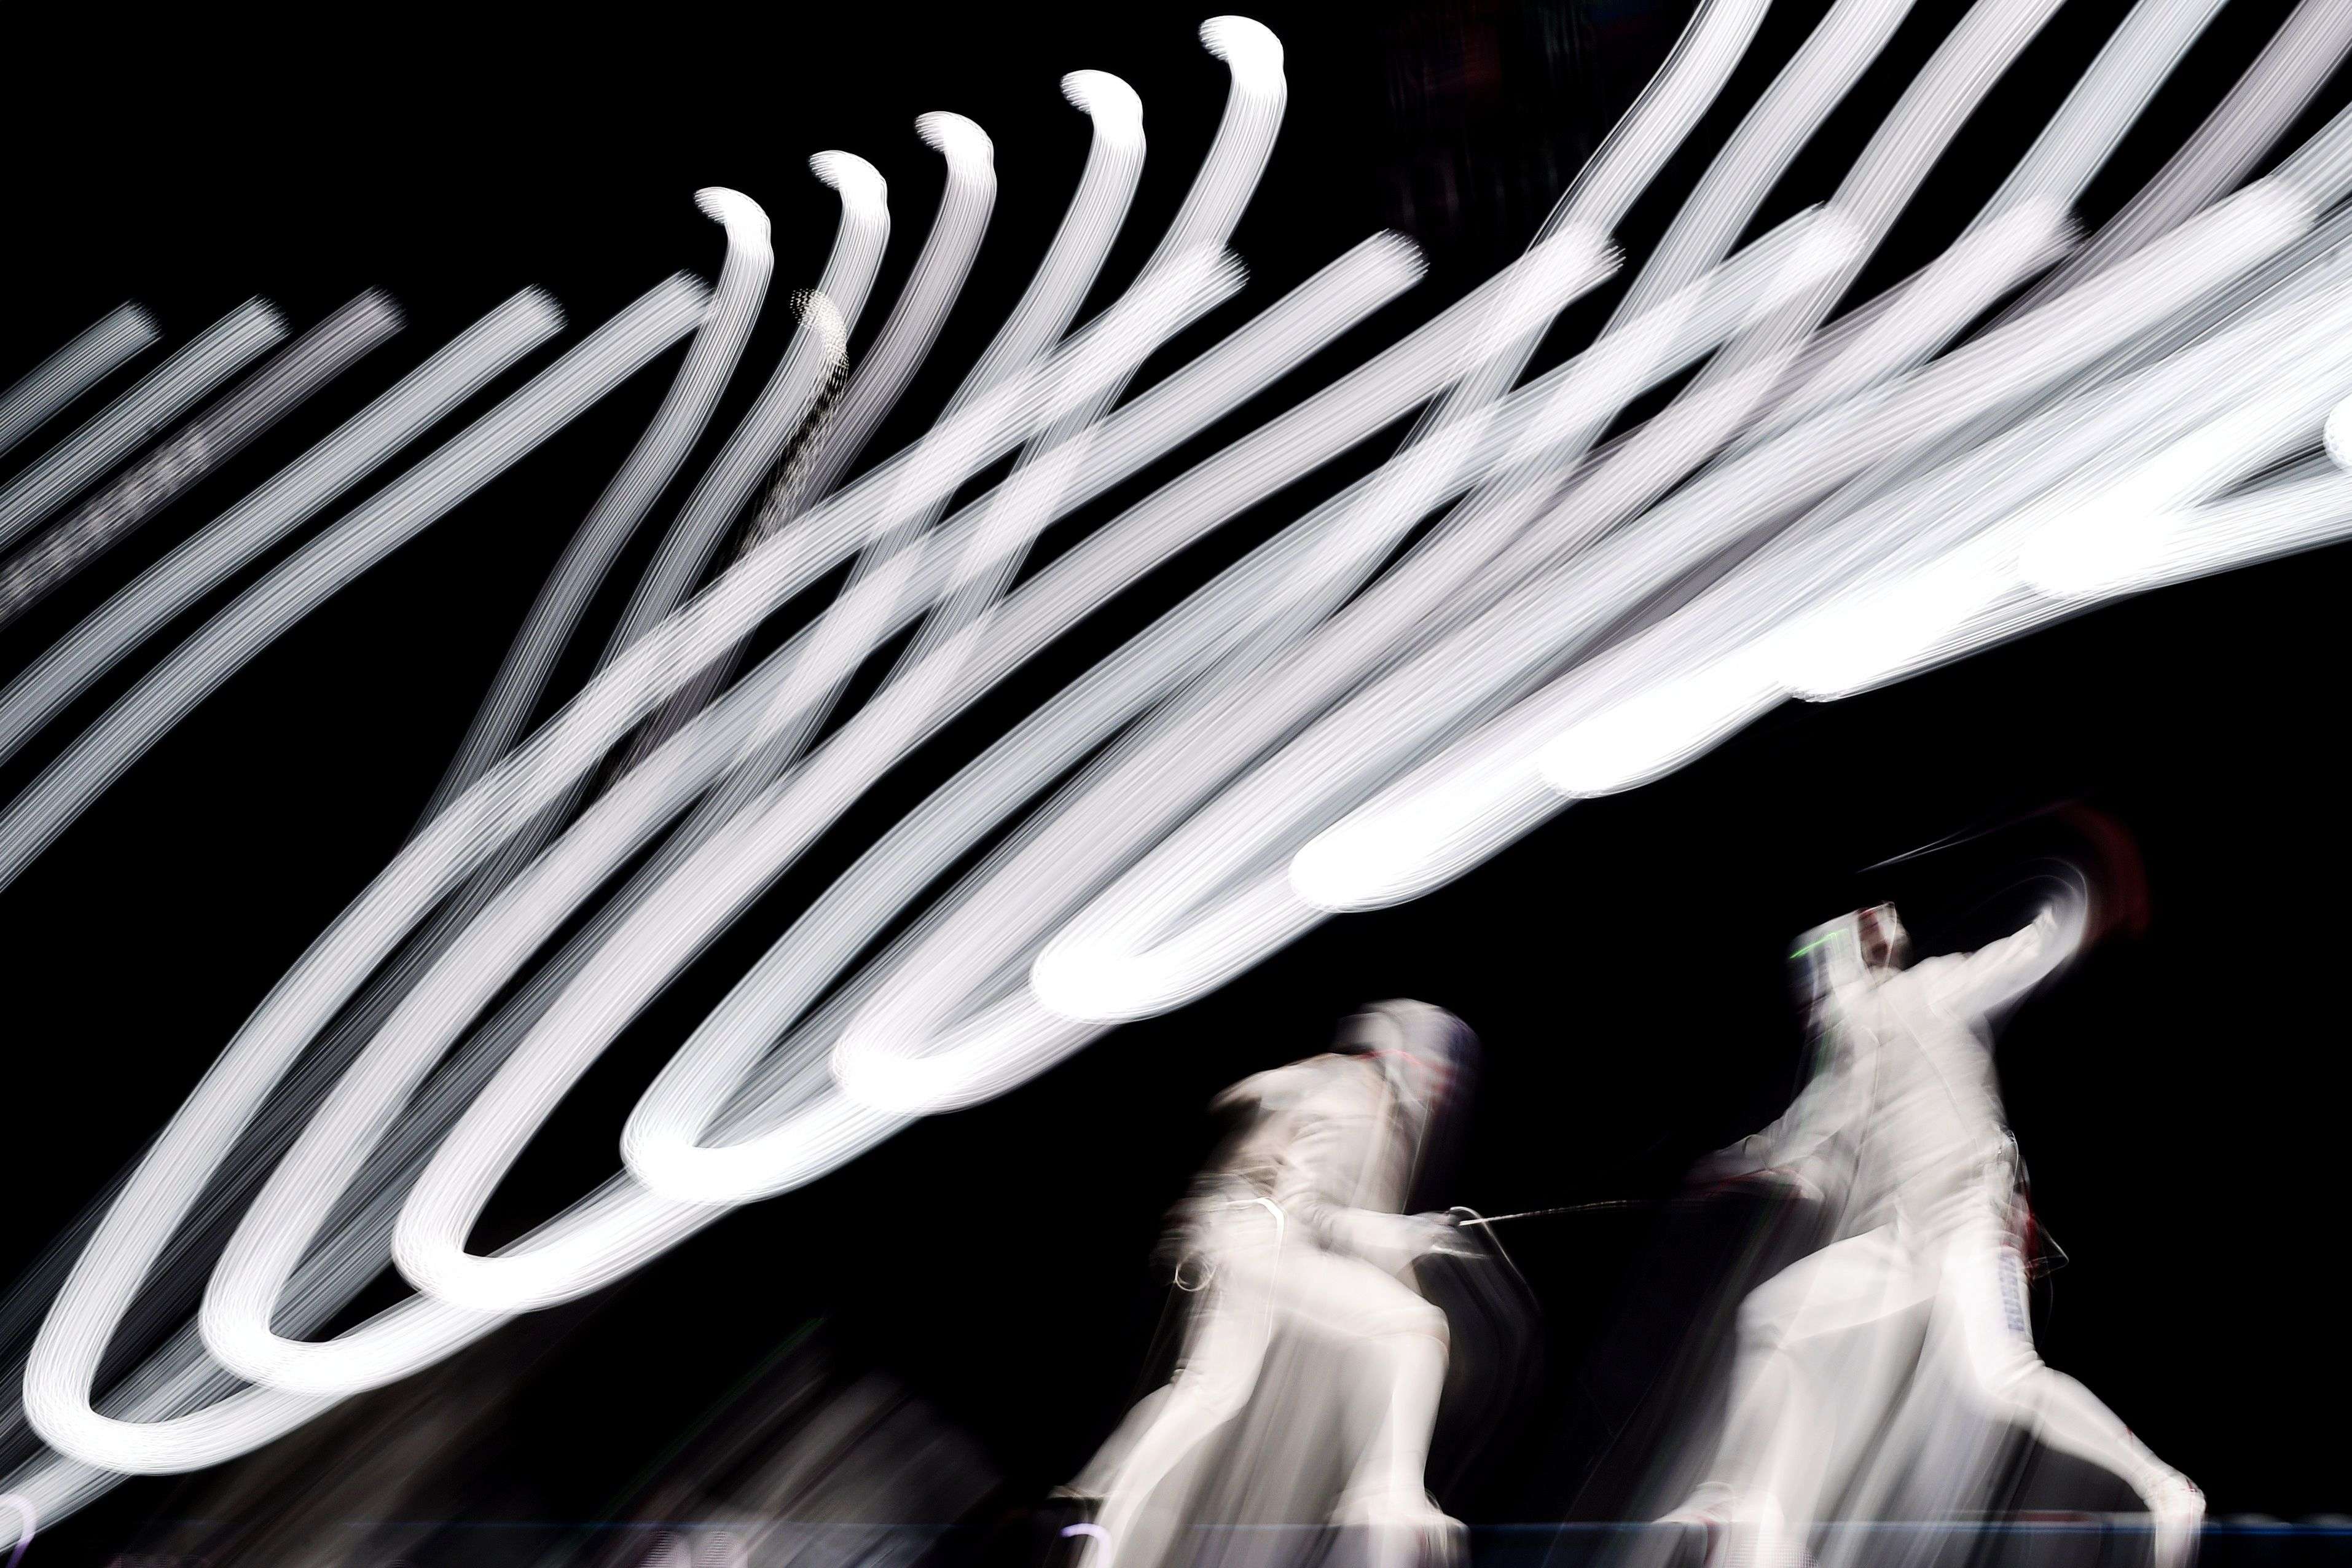 A long long exposure picture shows Japan's Yuki Ota (L) vying with US Alexander Massialas during the men's foil final event at the 2015 World Fencing Championships in Moscow. (AFP/ Kirill Kudryavtsev) 